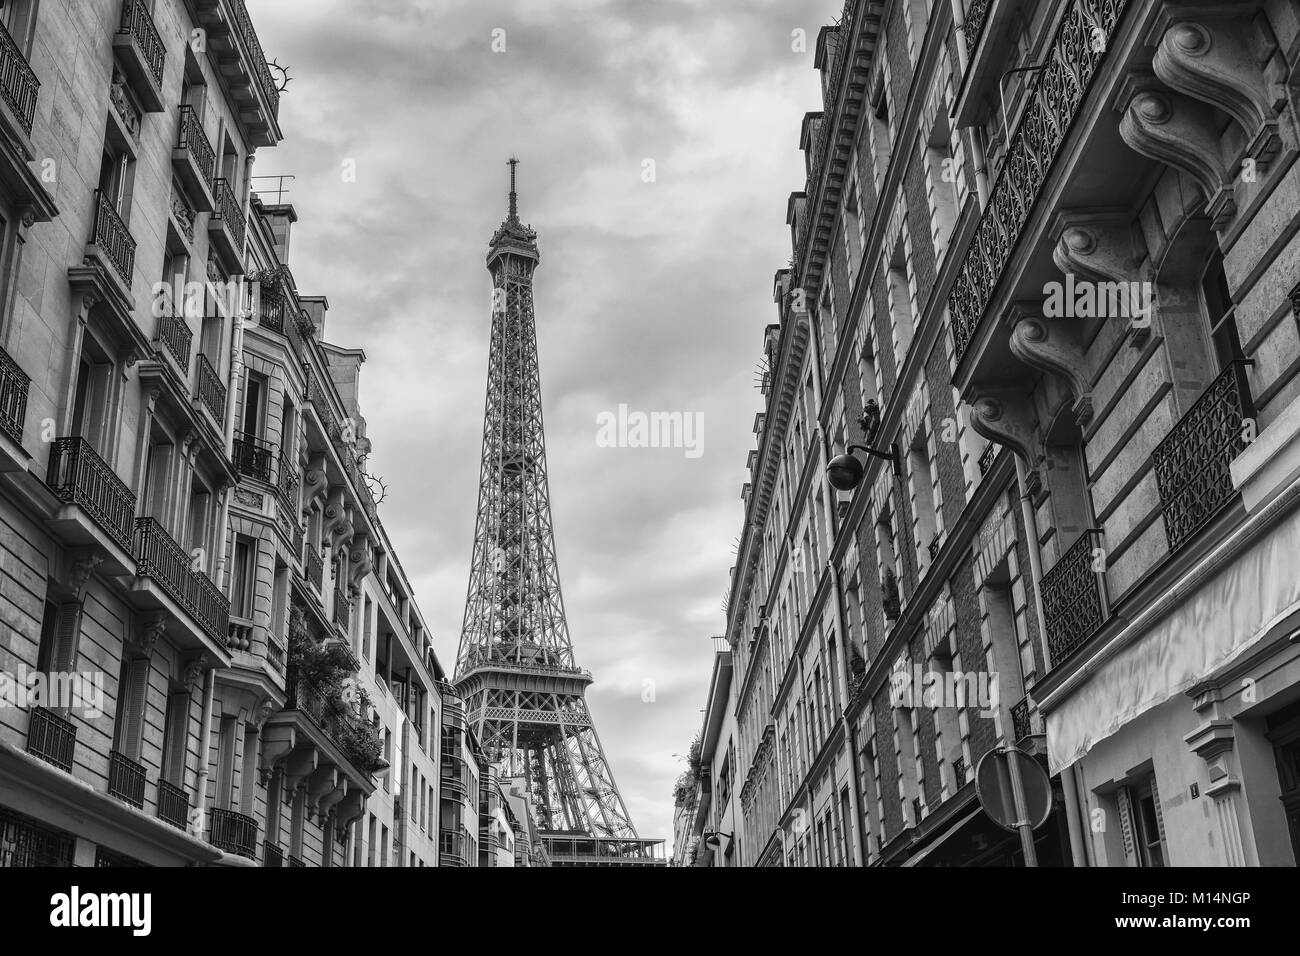 View from a small street in paris to the eiffel tower in black and white colors. Stock Photo